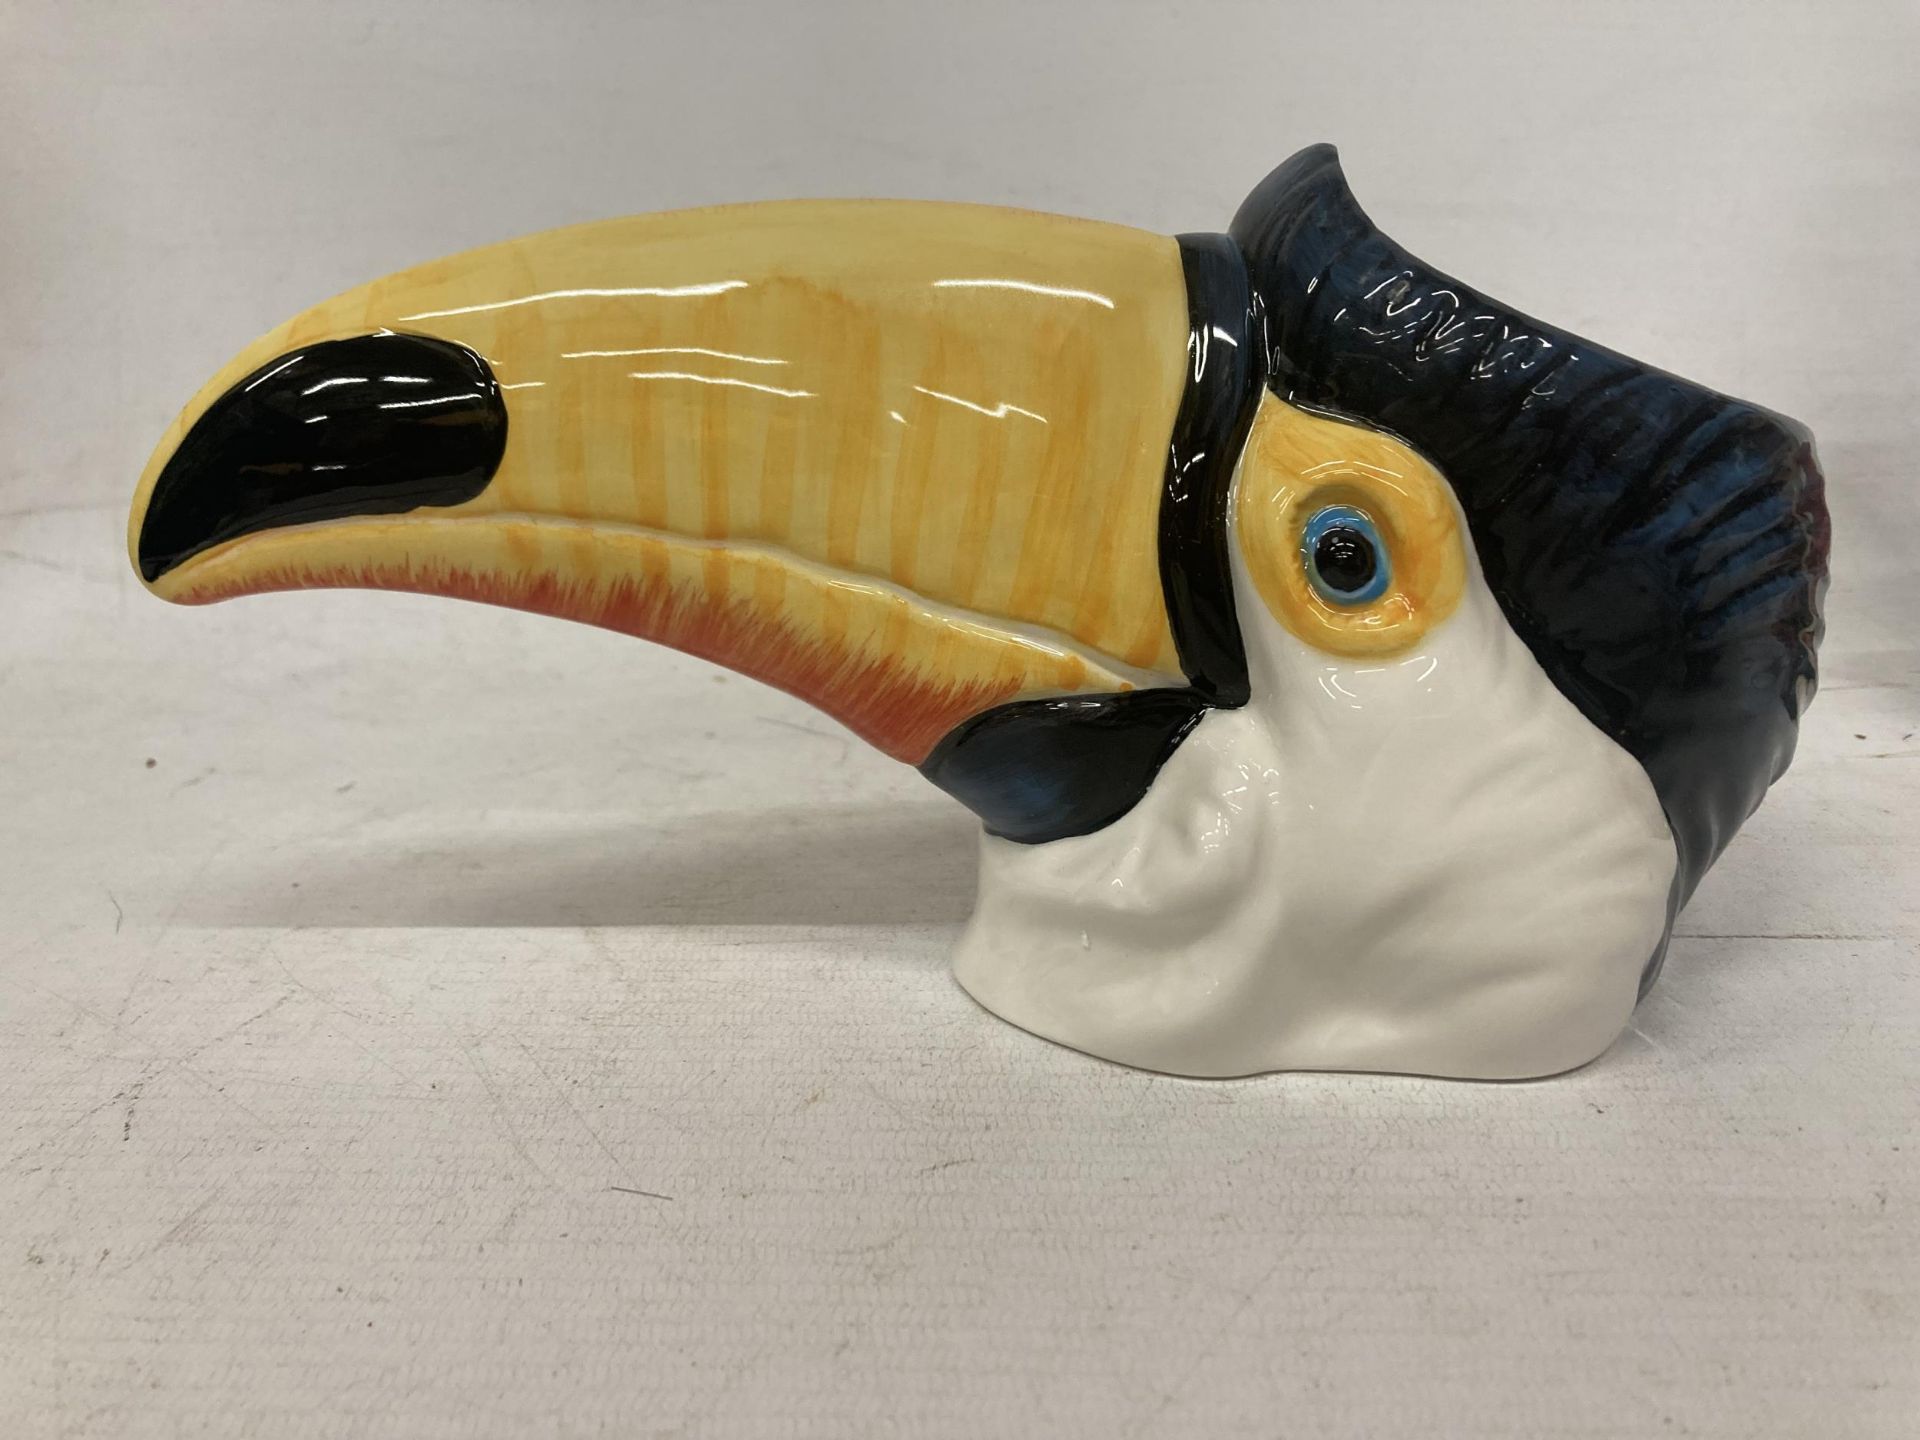 A TOUCAN HEAD BY DRAGONFLY MANUFACTURING DESIGNED BY JACK GRAHAM - Image 2 of 4